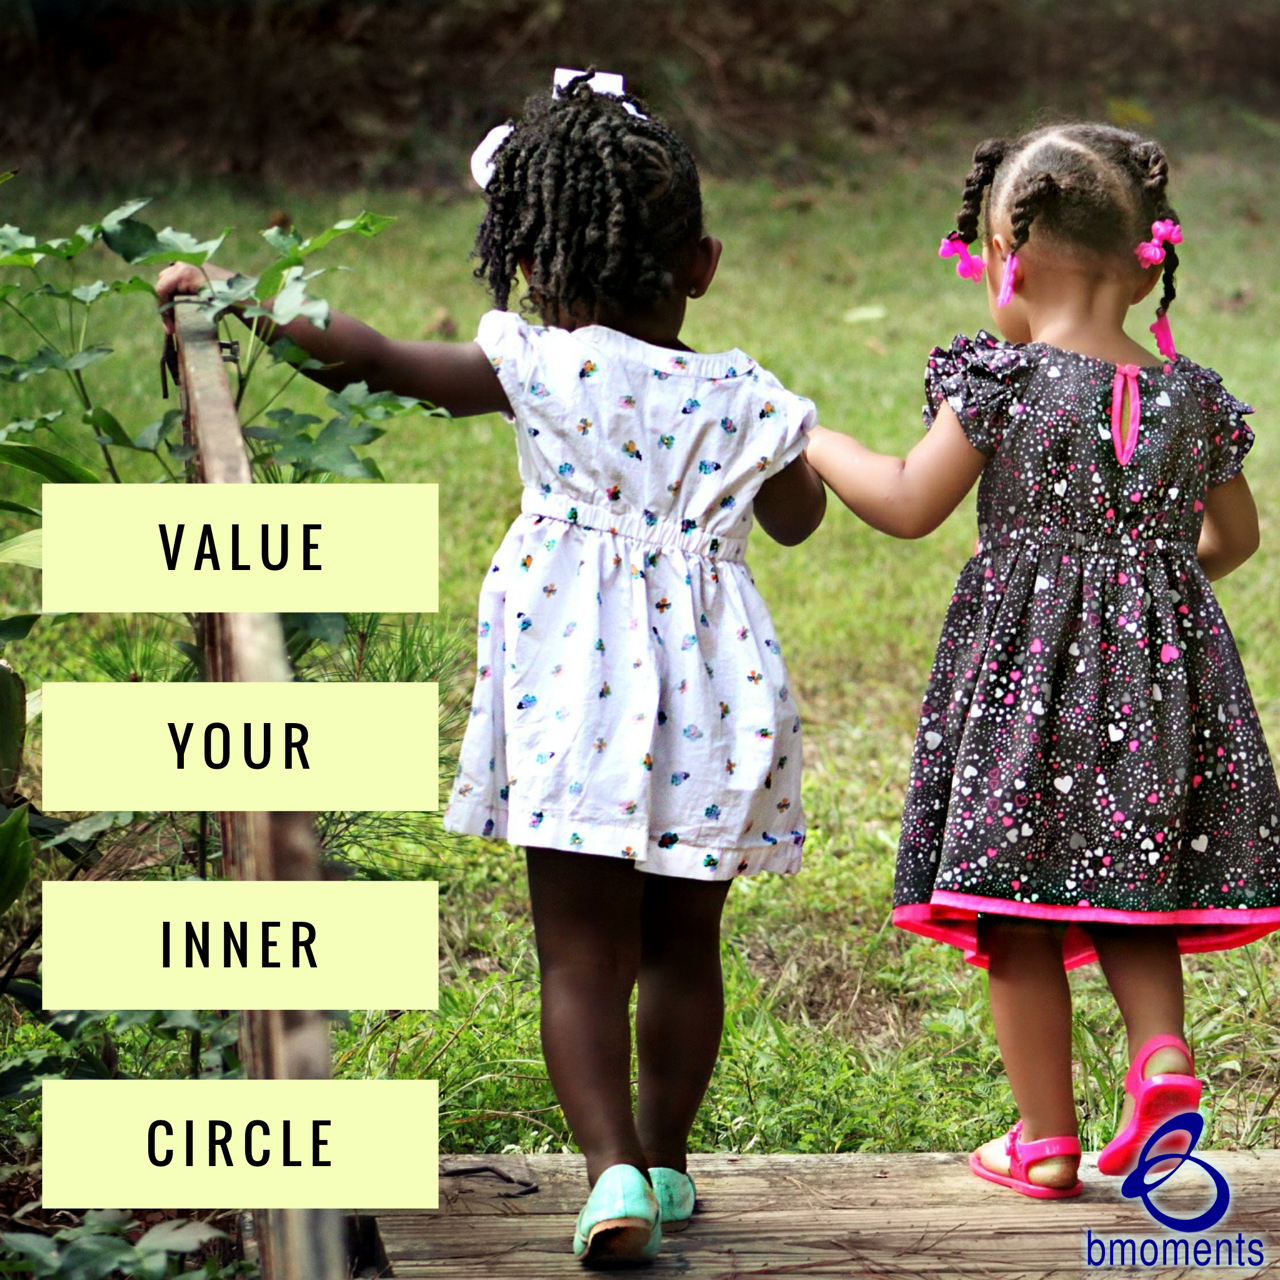 Make Sure You Have the Right Inner Circle